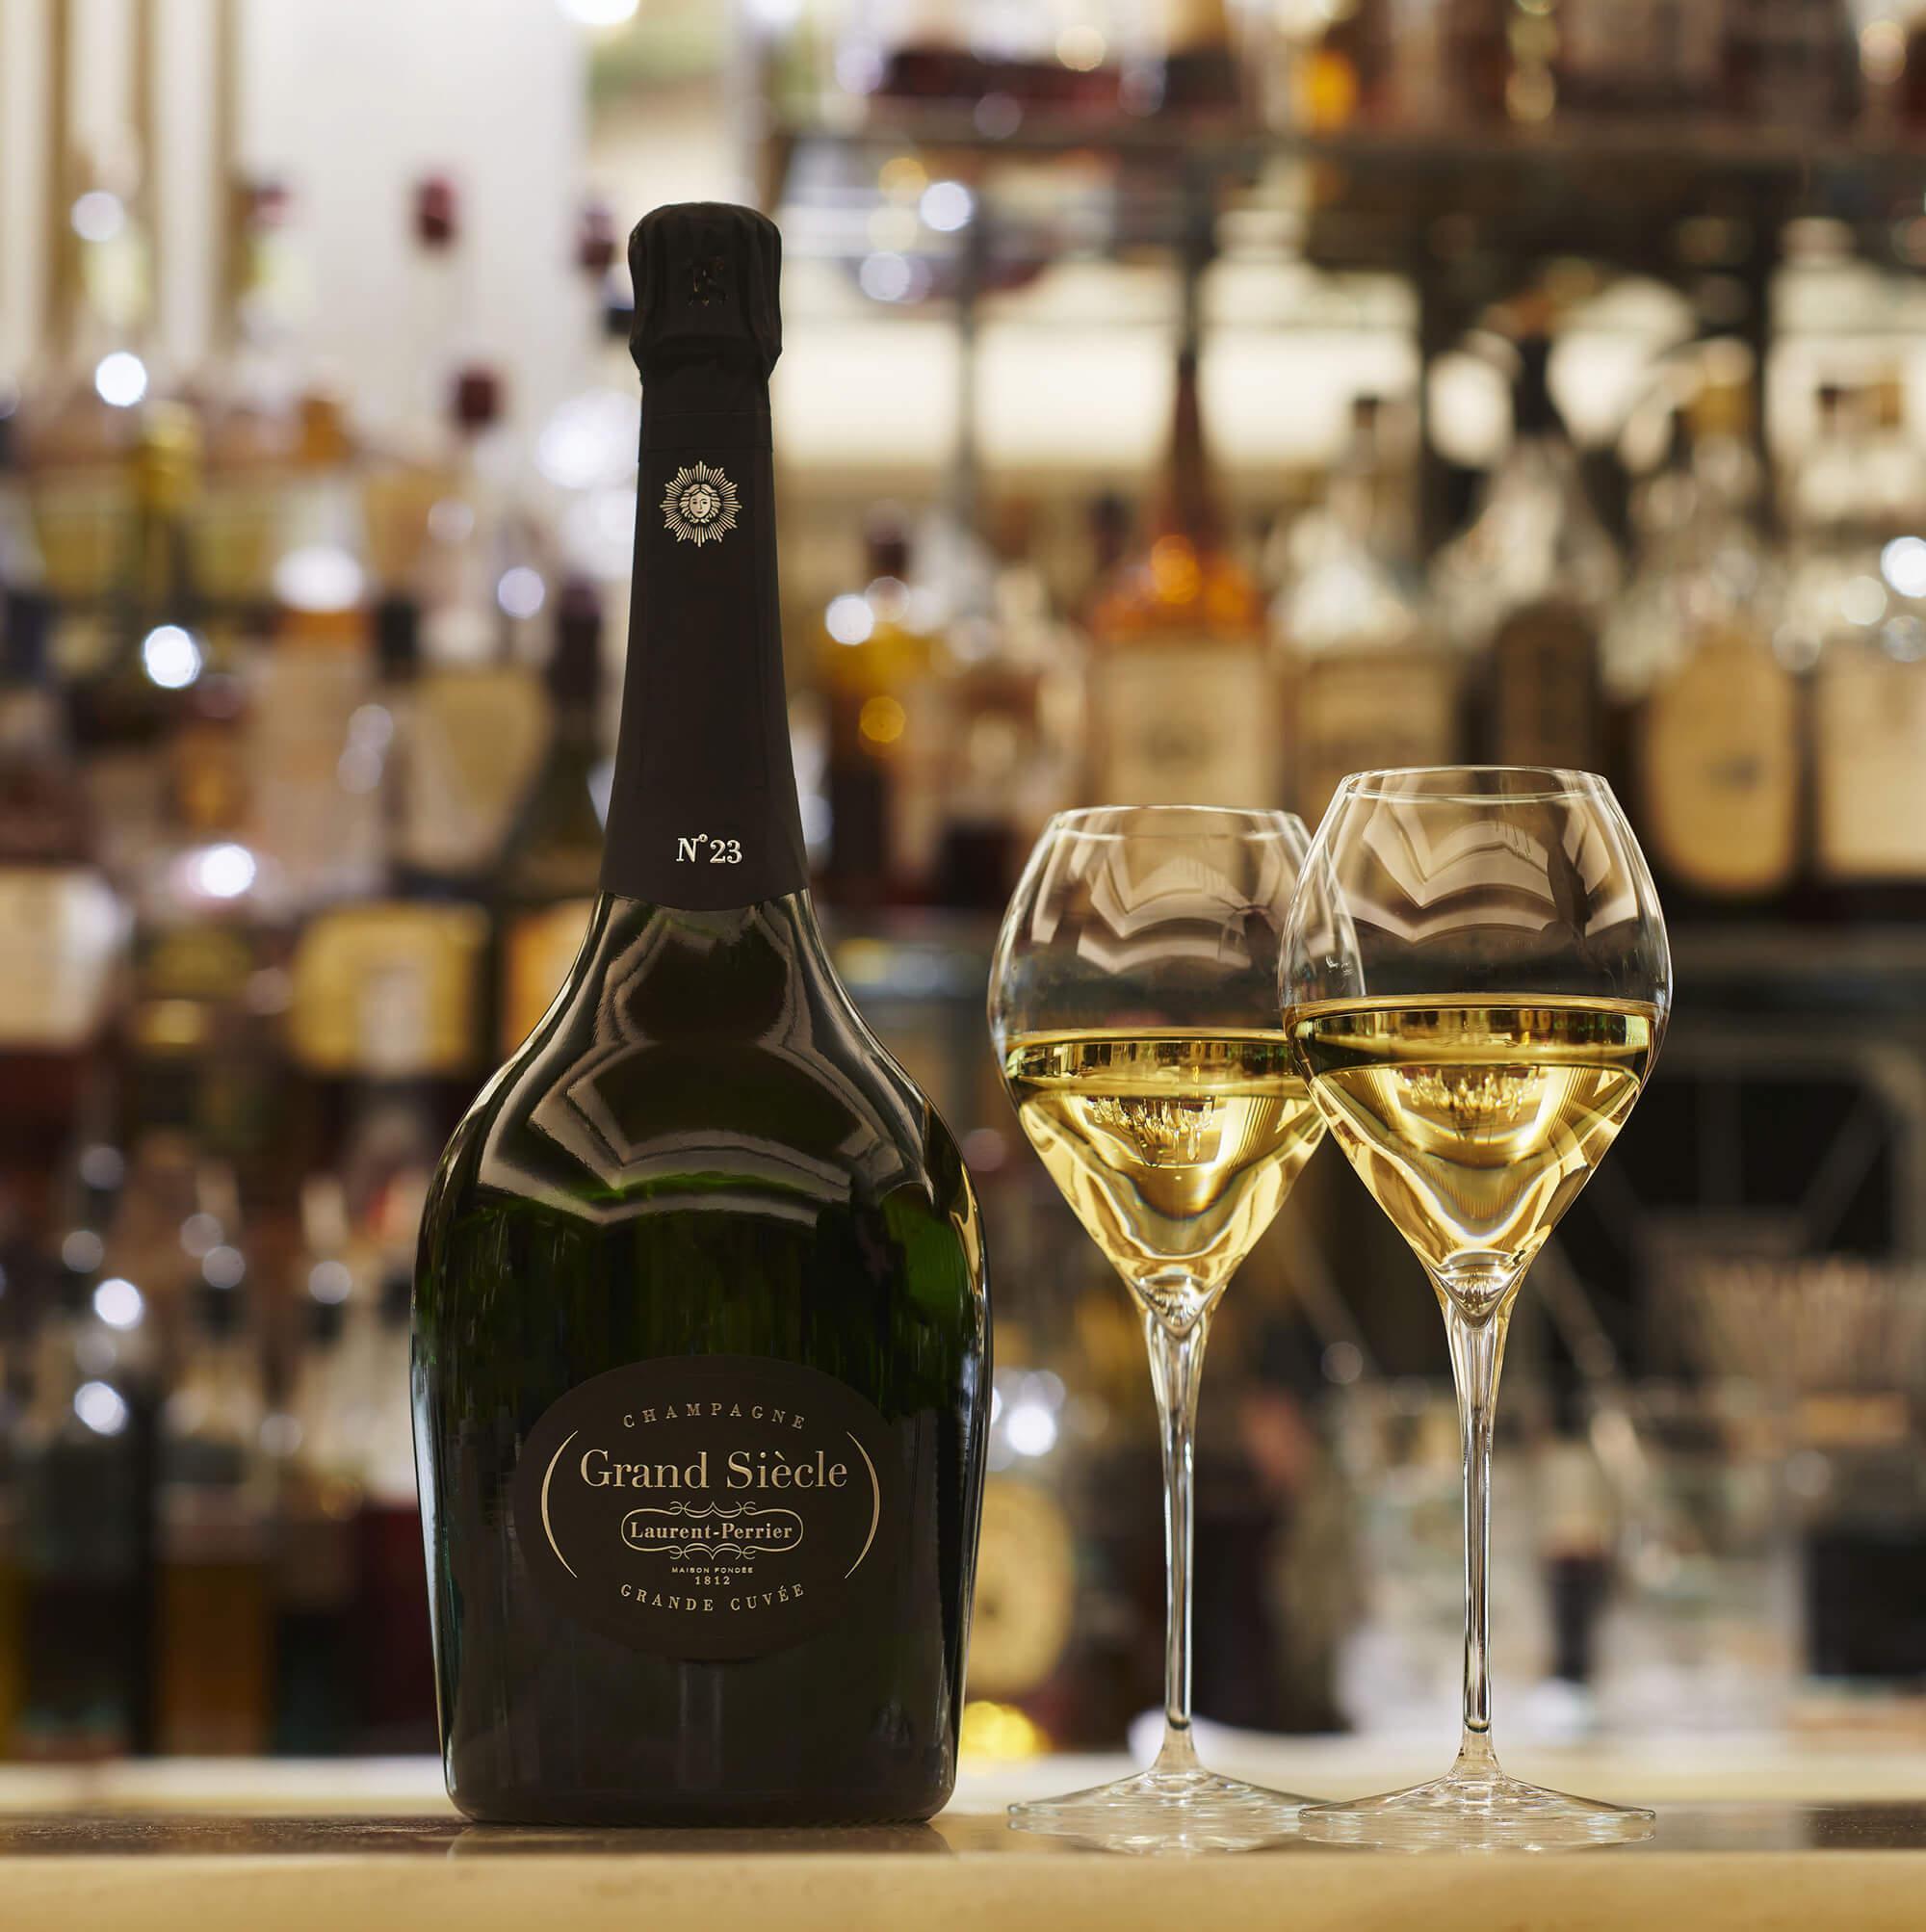 Champagne-Laurent-Perrier-Grand-Siècle-23